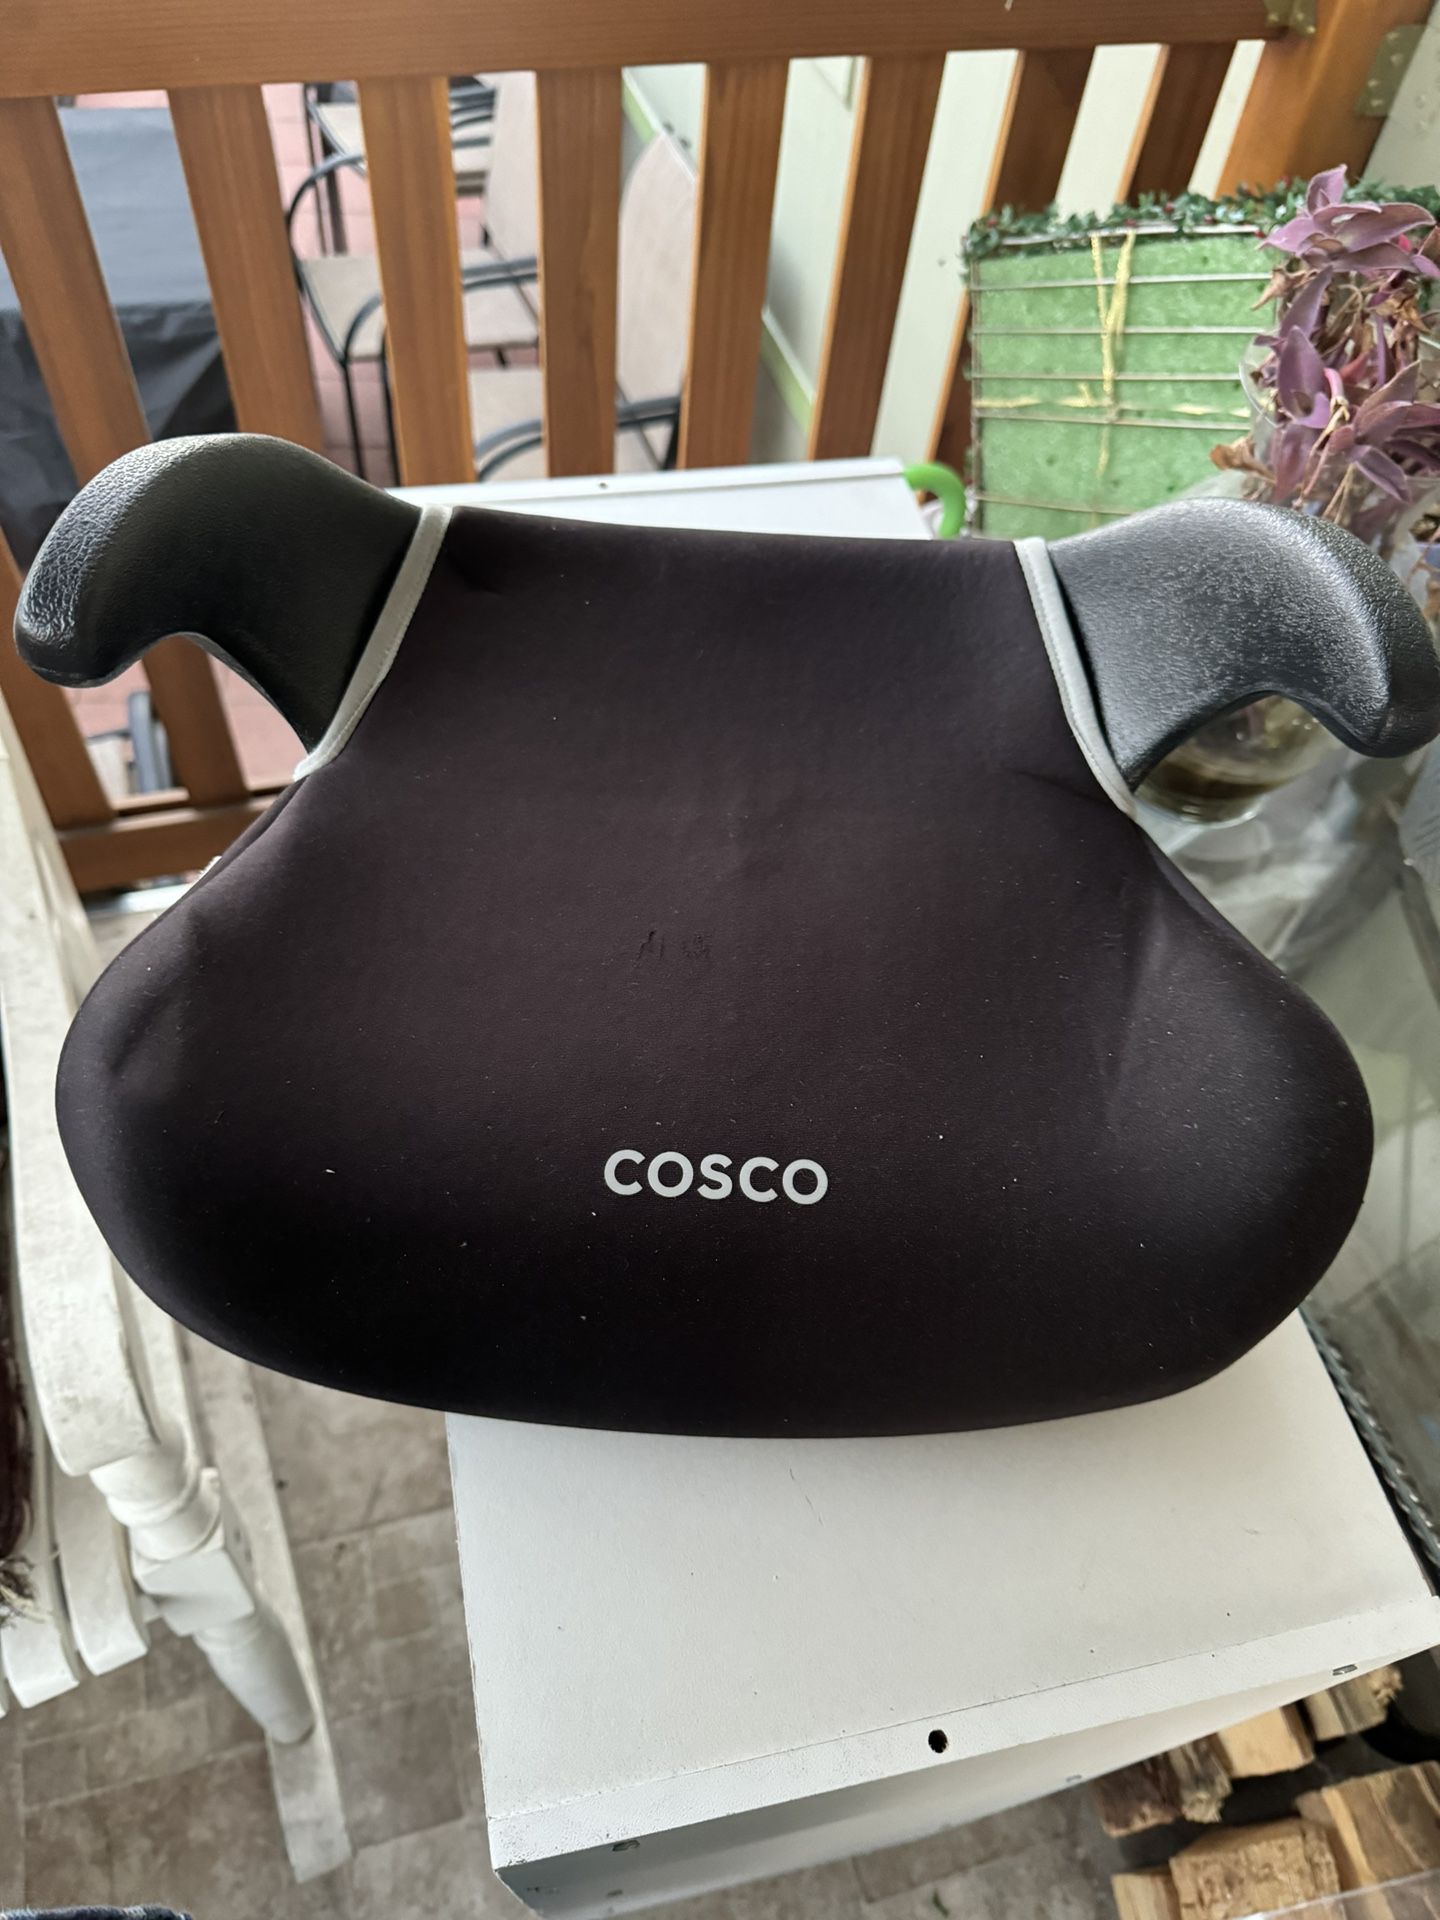 Cosco Booster Car seat